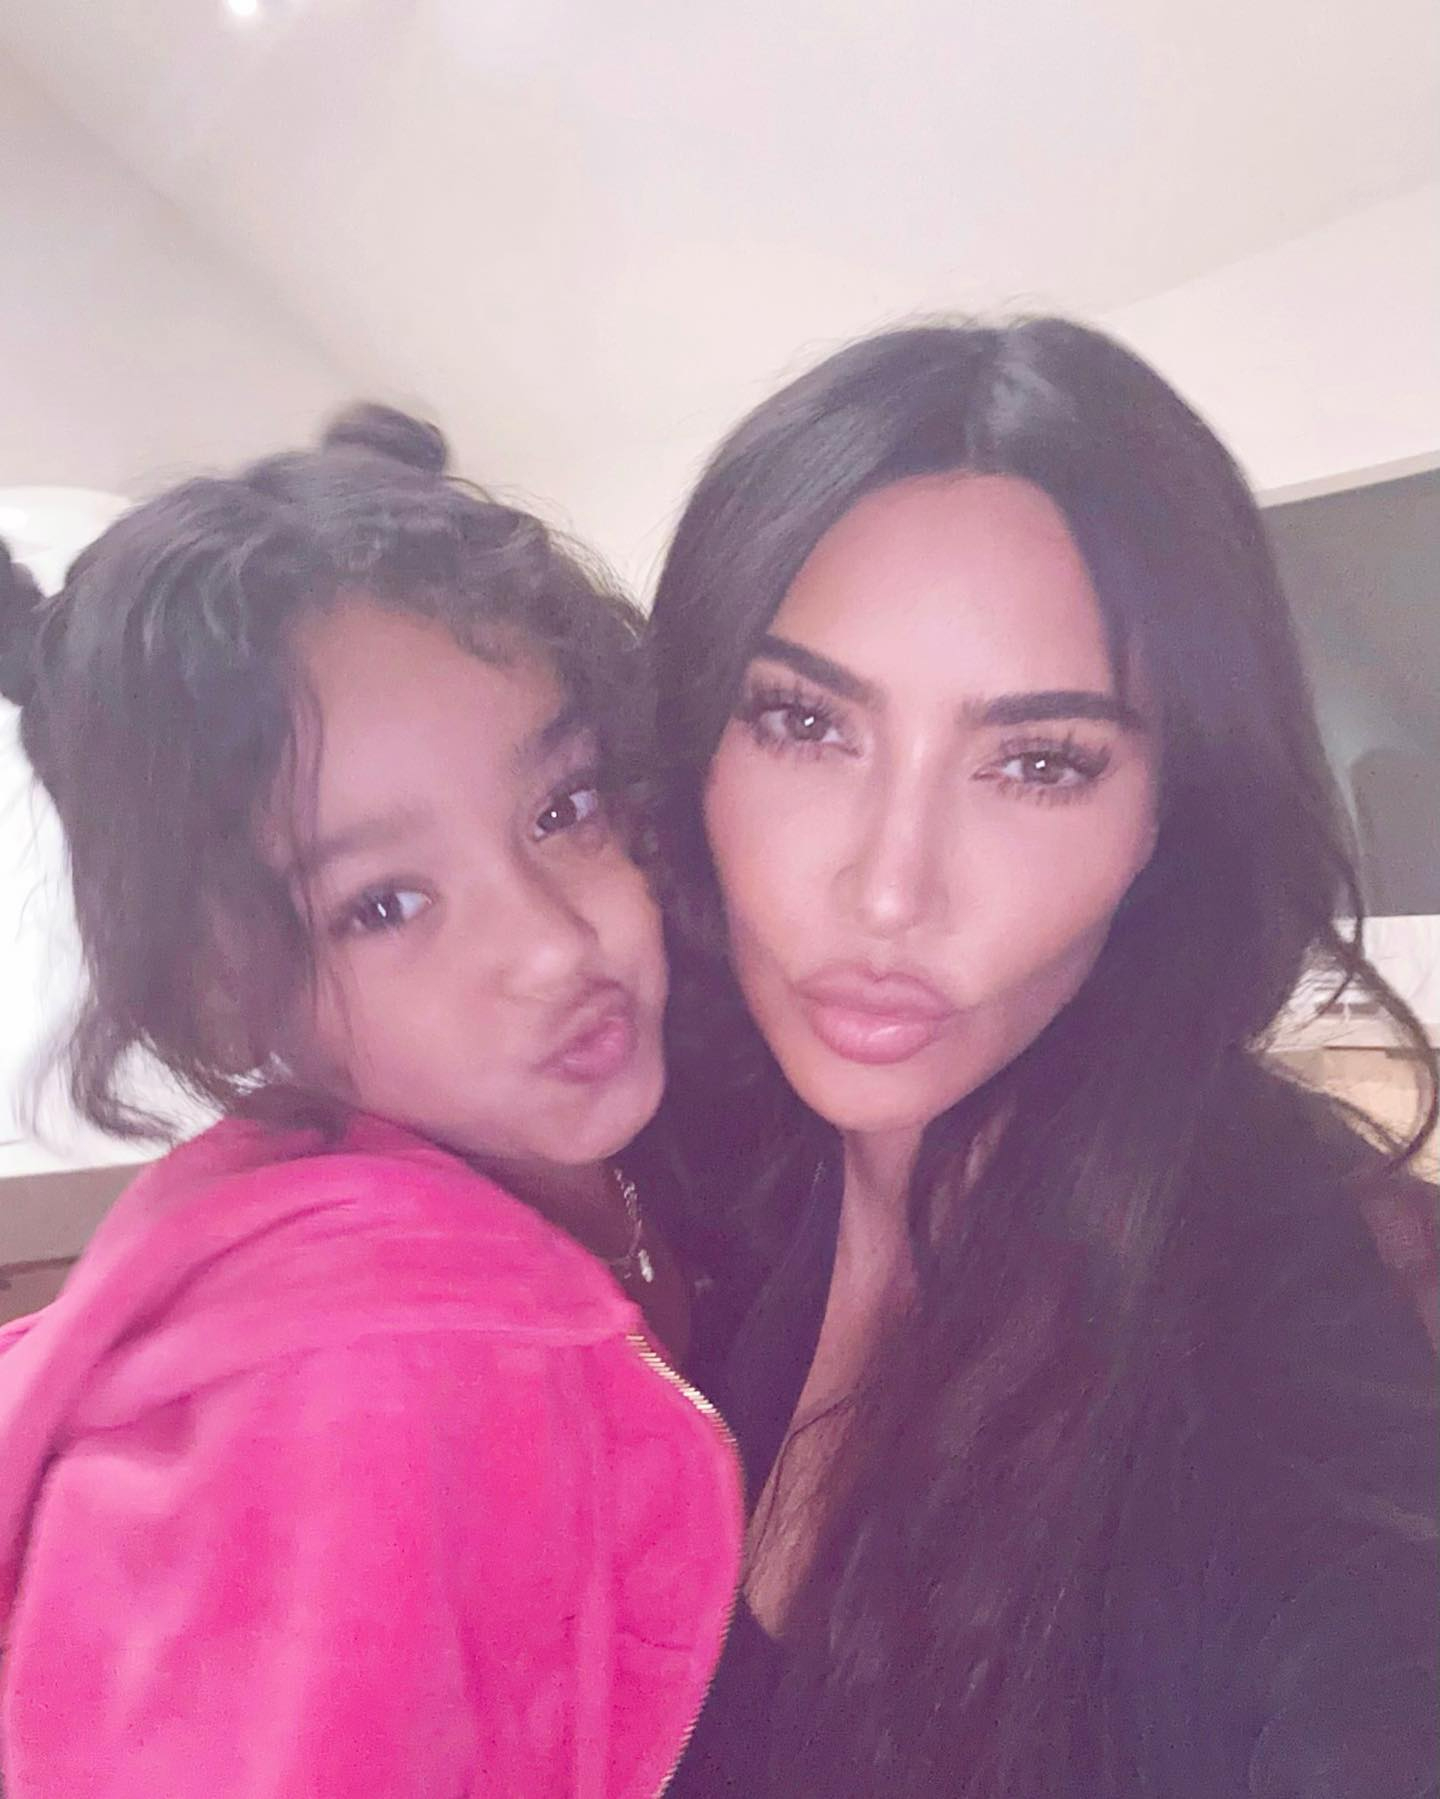 Kim and Chicago twin with matching pouts